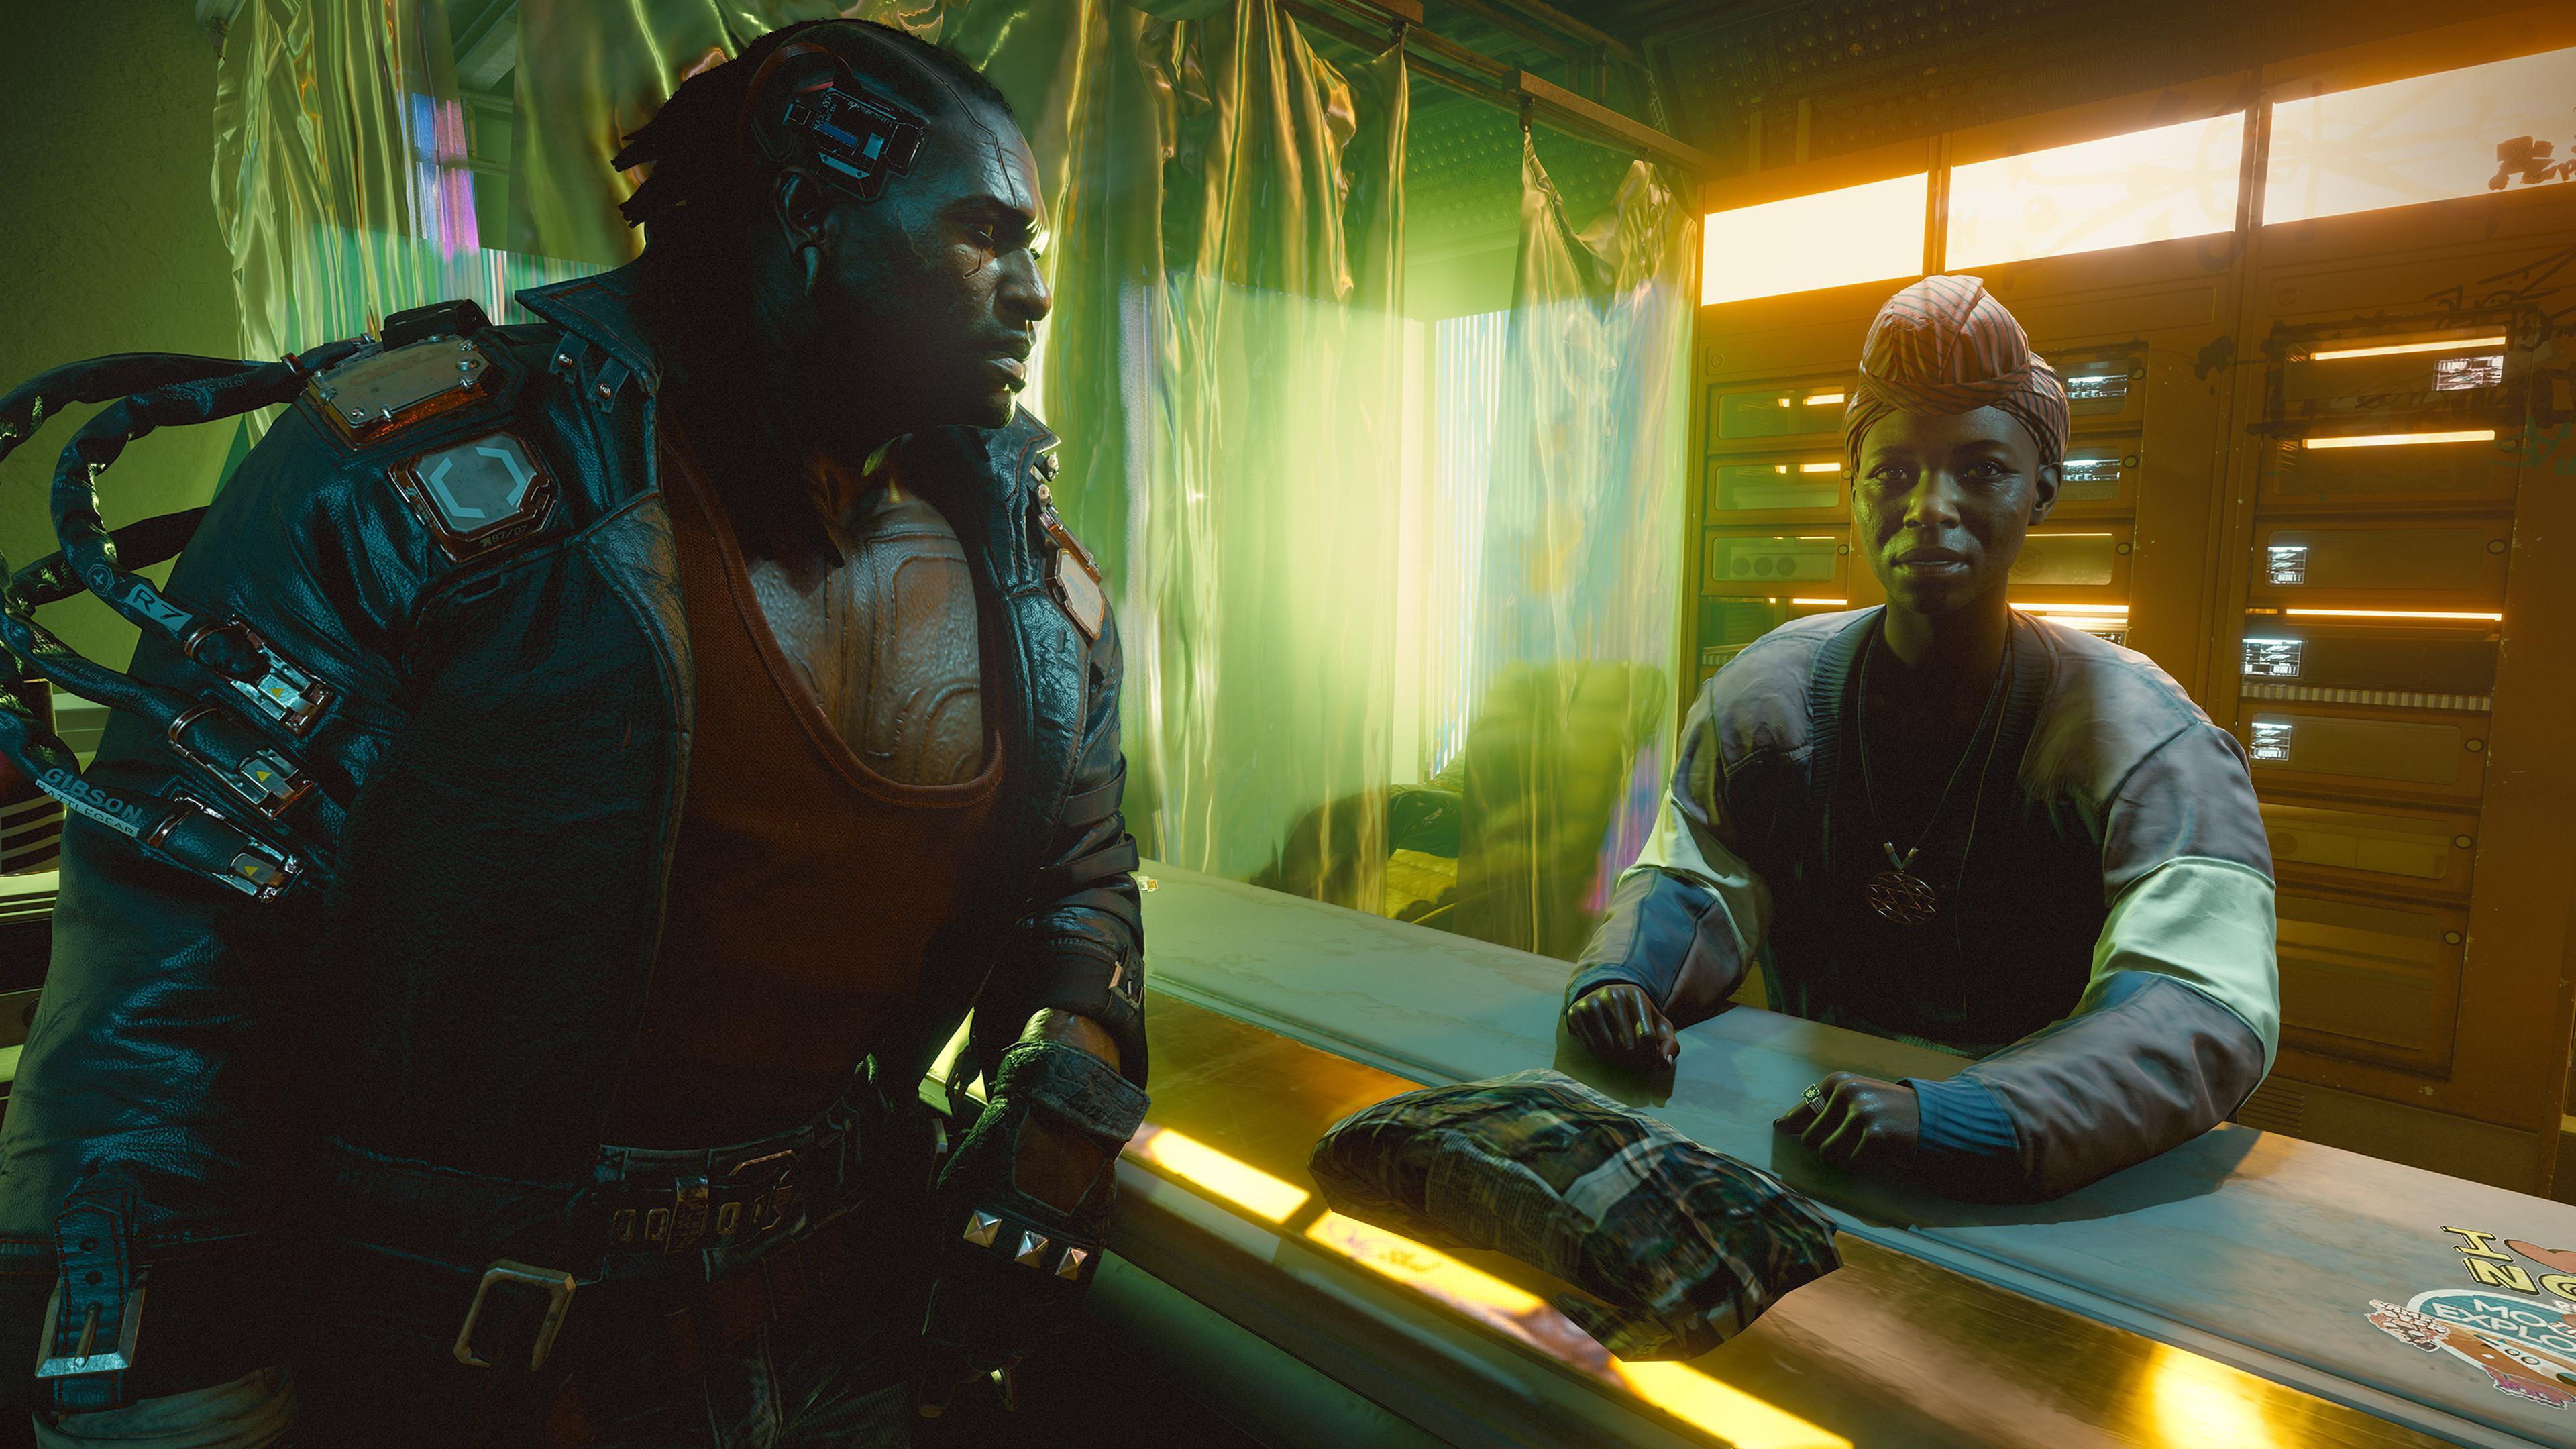 Cyberpunk 2077: Gameplay and everything we know after E3 2019